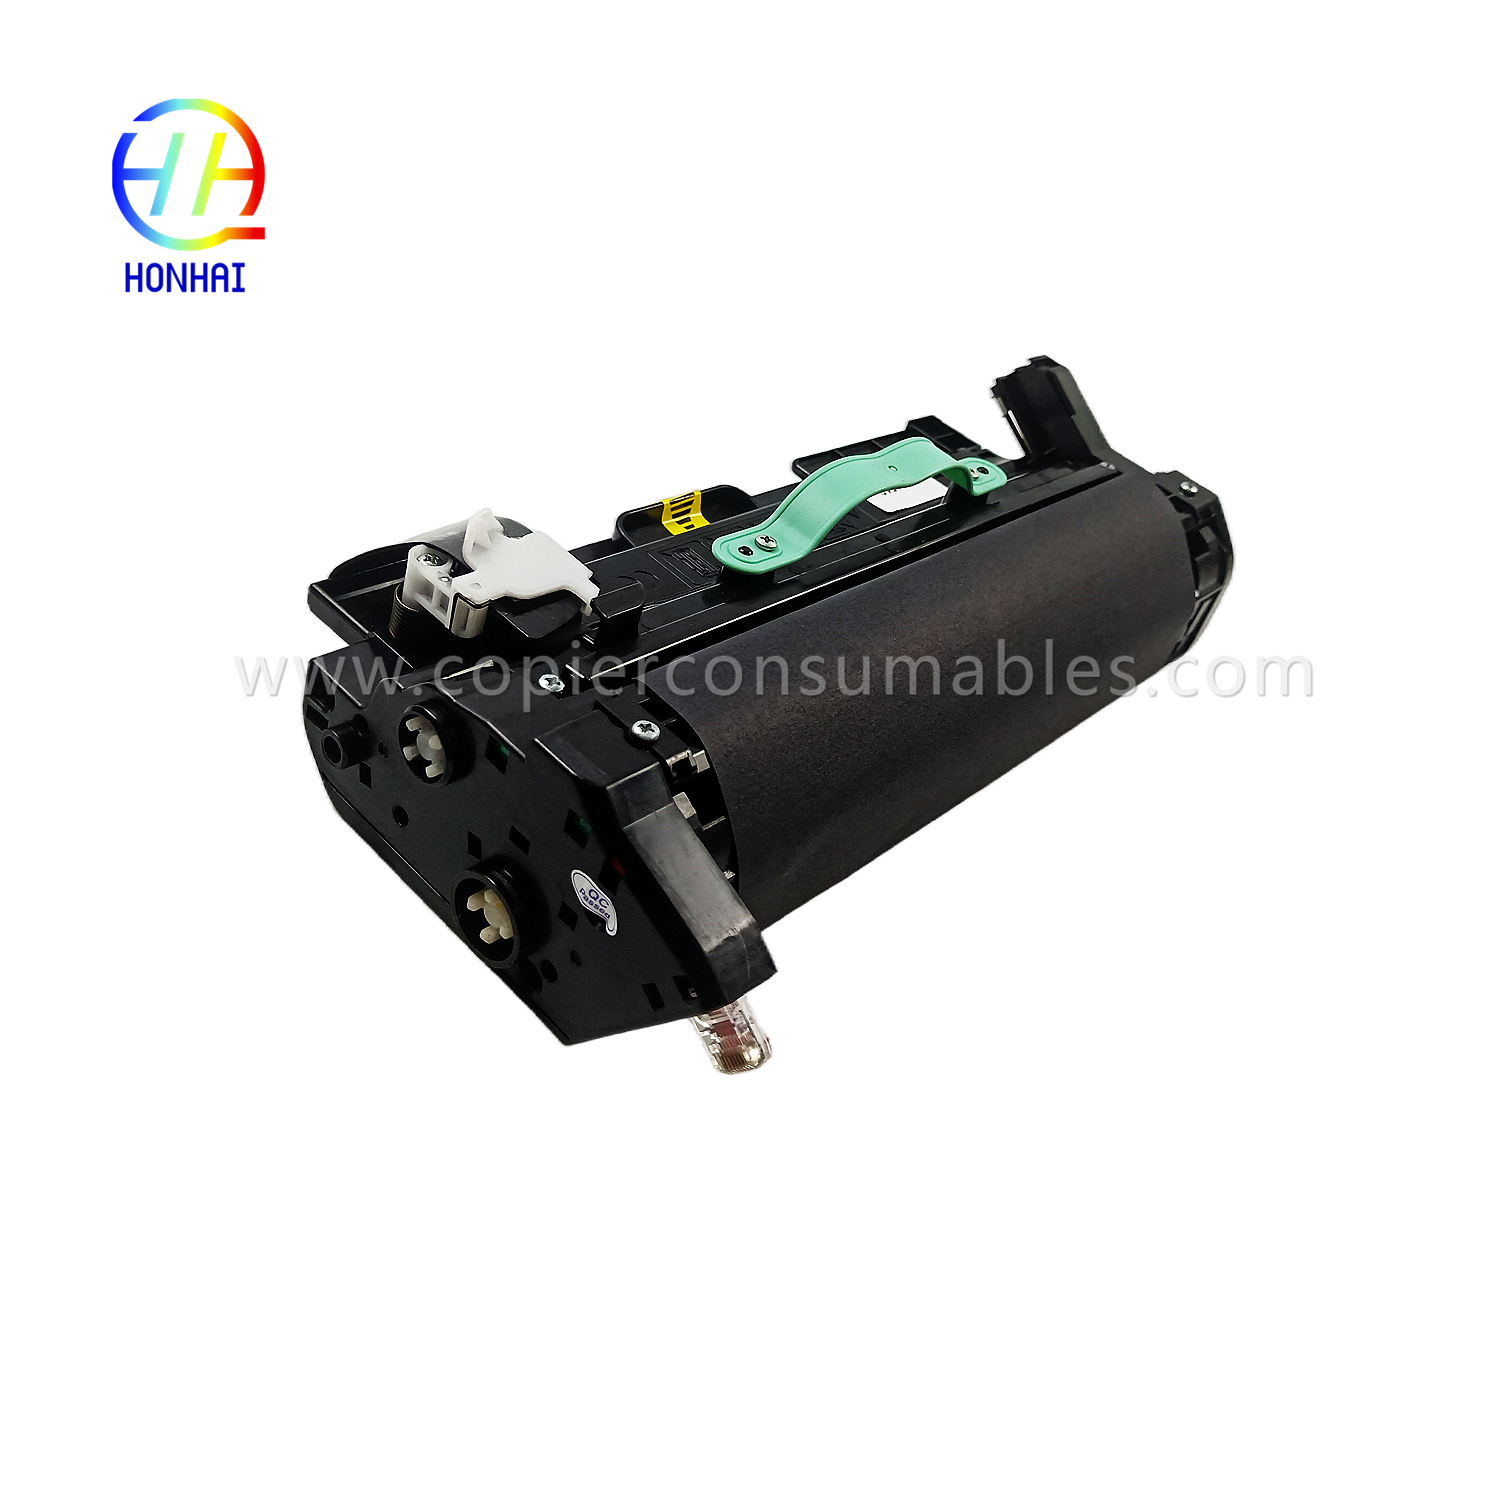 https://www.copierconsumables.com/fuser-unit-for-samsung-ml4510-ml4512-ml-4510nd-ml-4512nd-ml-4510-ml-4512-jc91-01028a-fusing-assembly-2-product